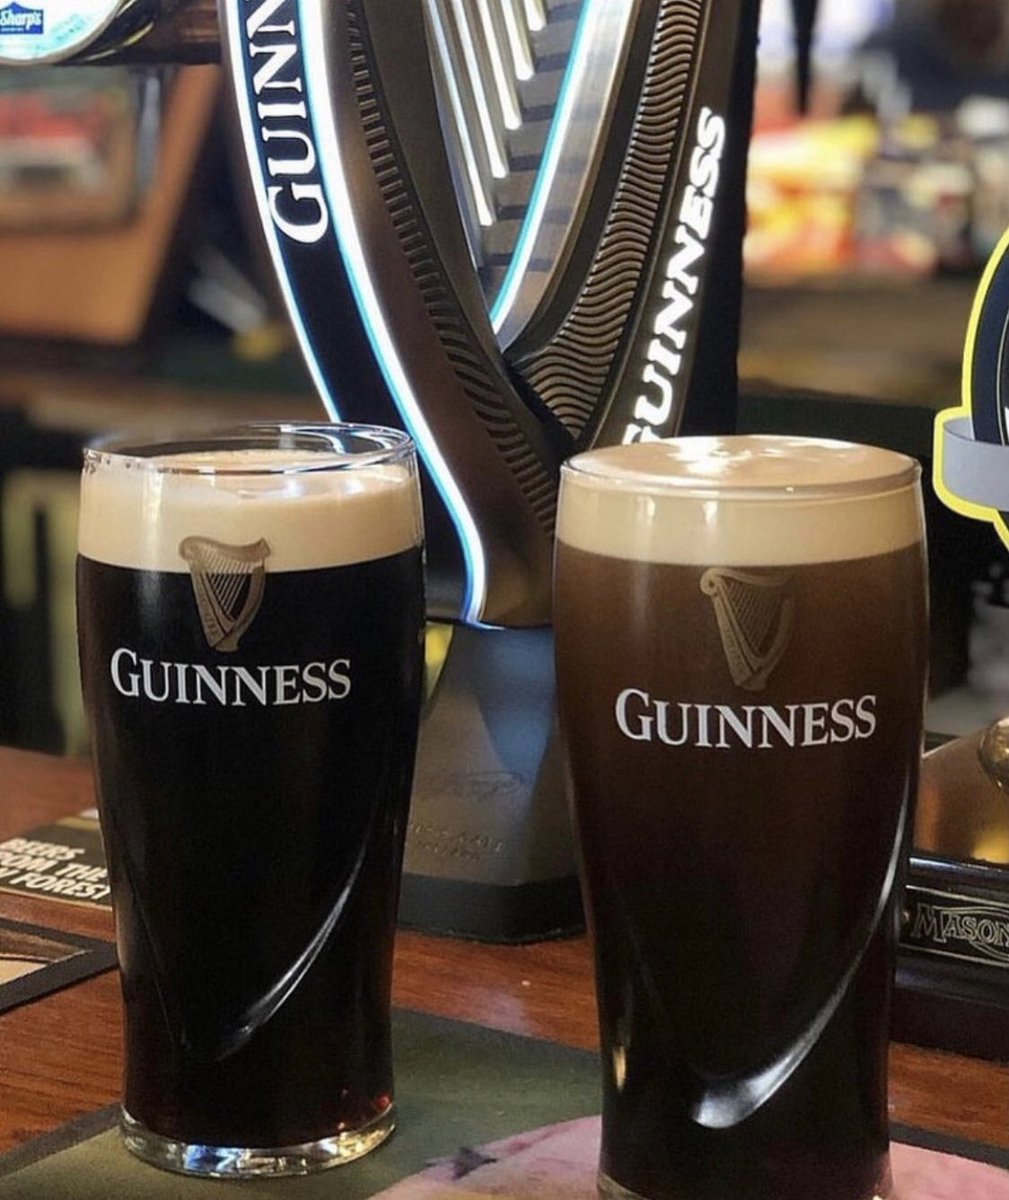 A fresh pint of Guinness is calling! 😍

Our doors open tomorrow from 4pm until 11pm; see you there. 🍻

.
.
.
#deacons #craftbeer #salisbury #localpubs #freehouse #fishertonstreet #independent #realale #timeforwiltshire